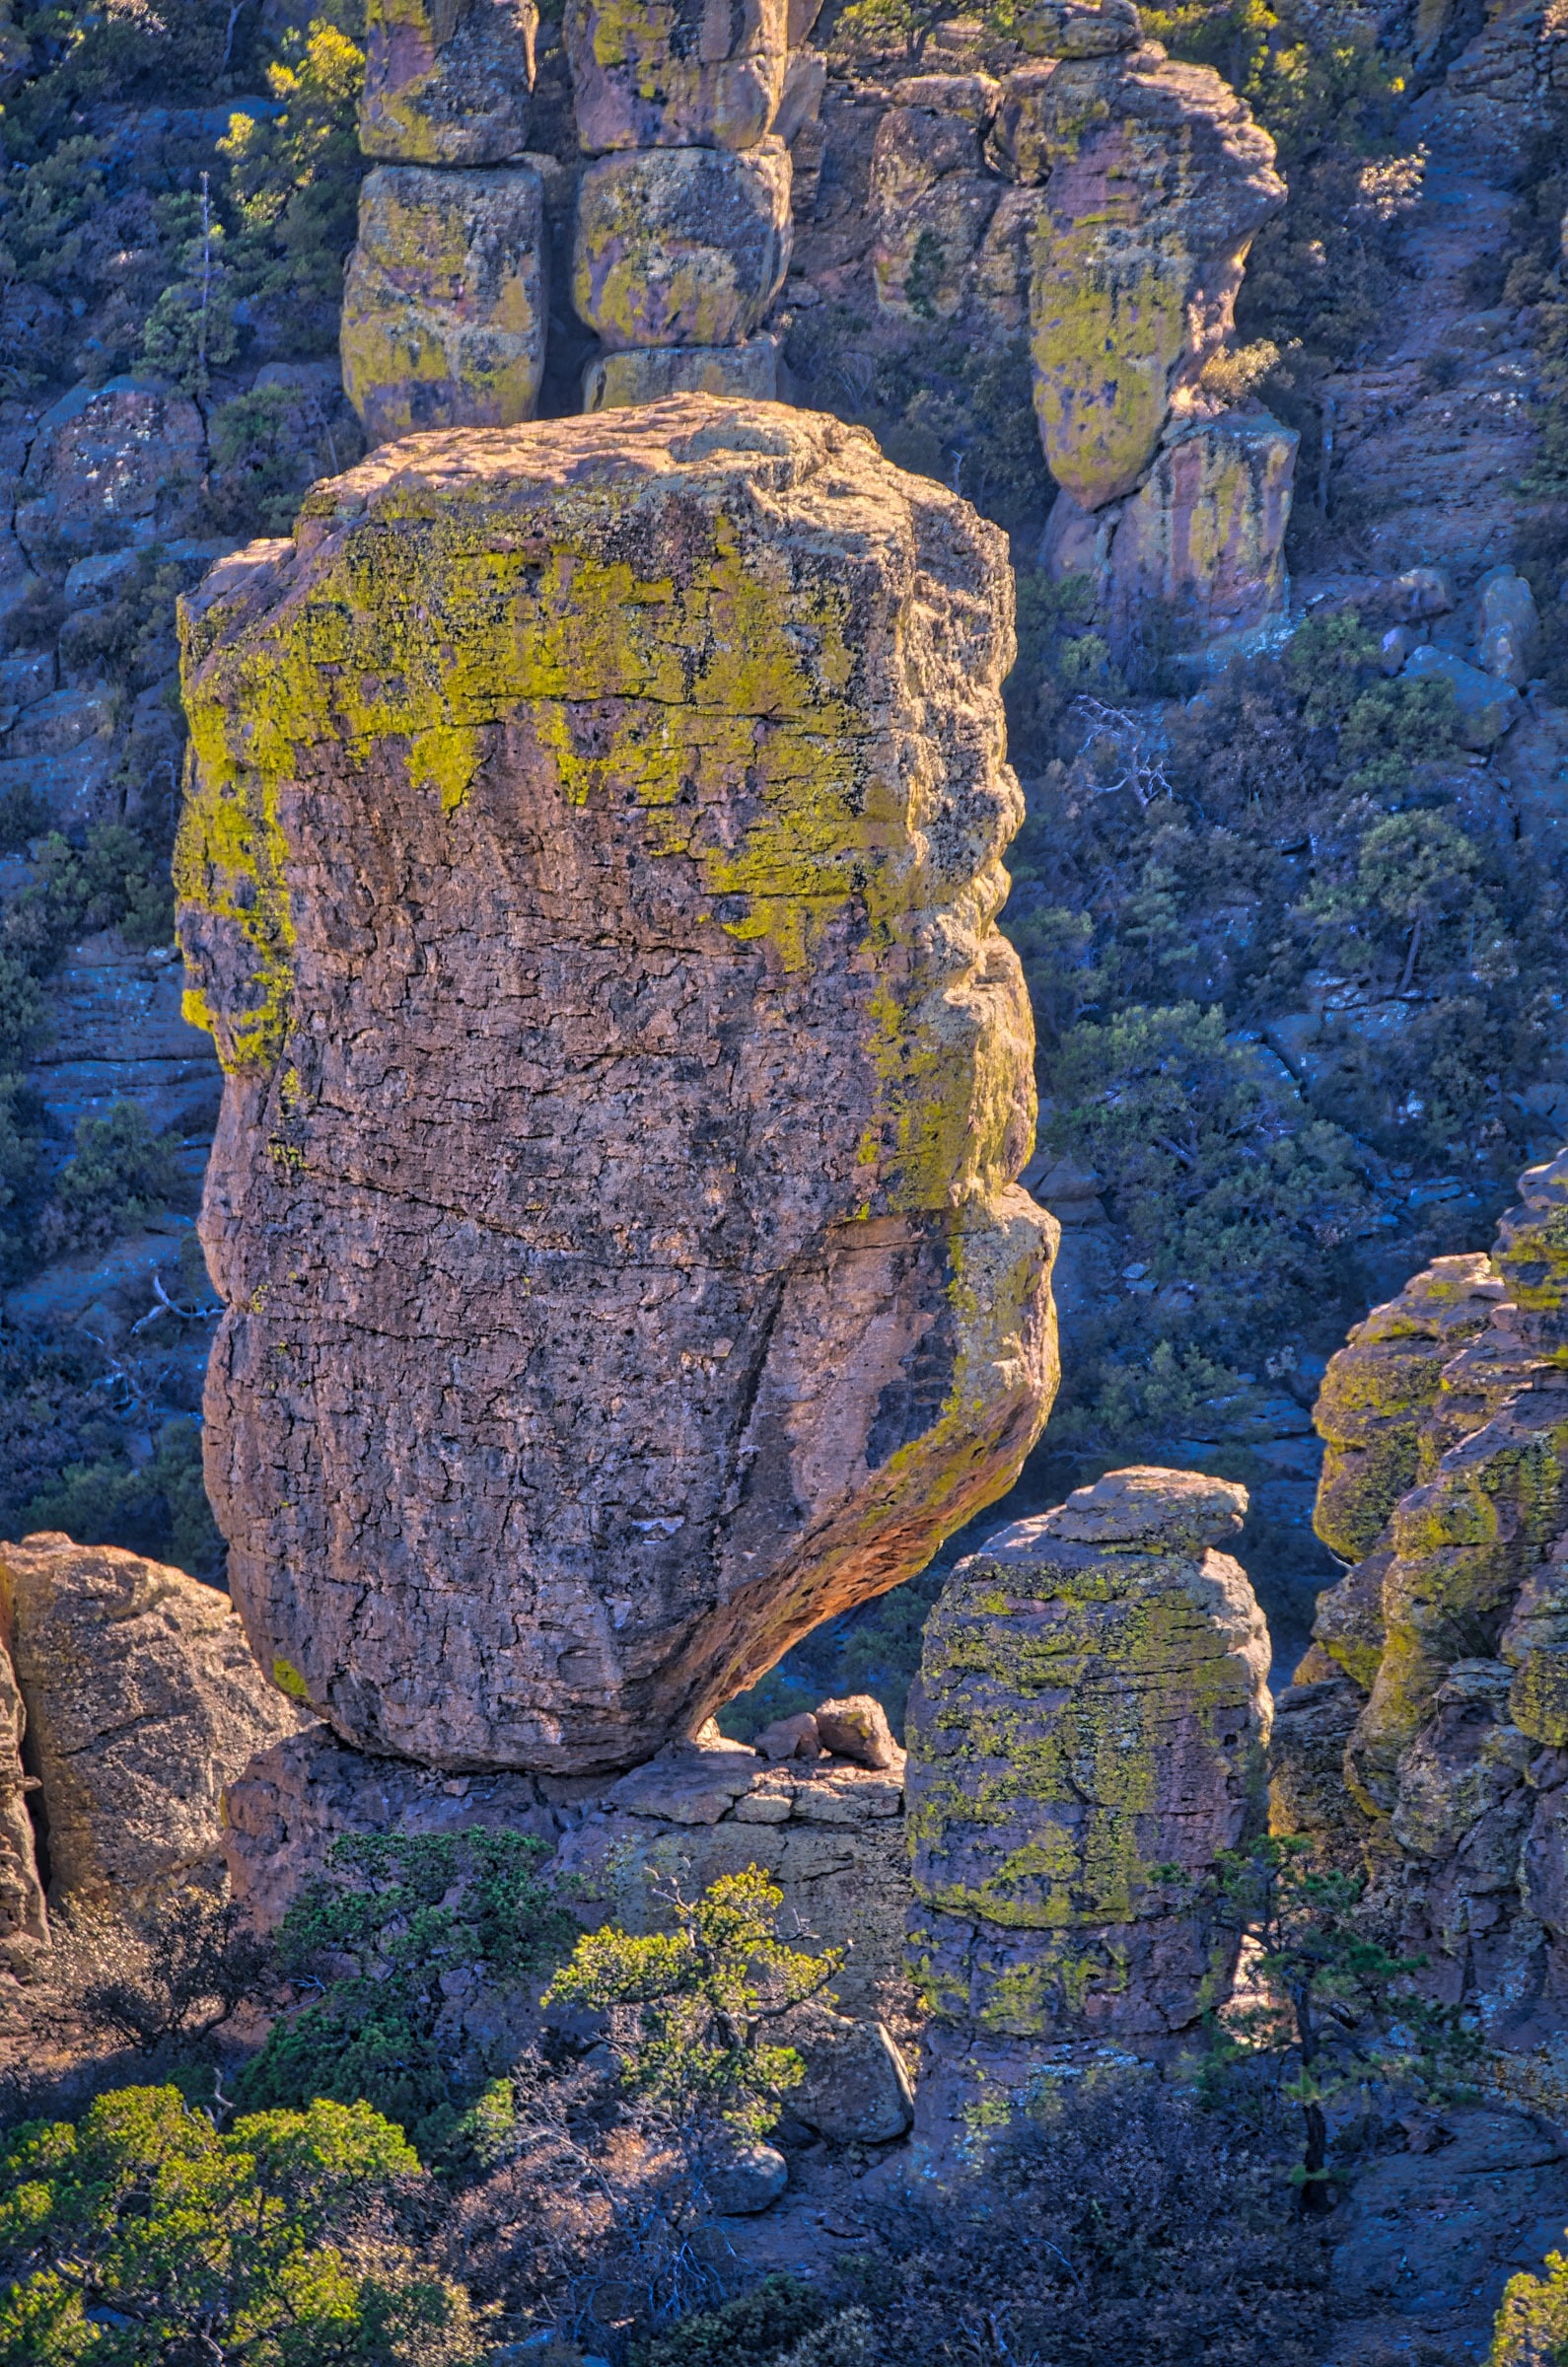 One of many balanced rocks found  in Chiricahua National Monument. The rock, as well as surrounding columns and pinnacles, are formed of Rhyolite Canyon Tuff.